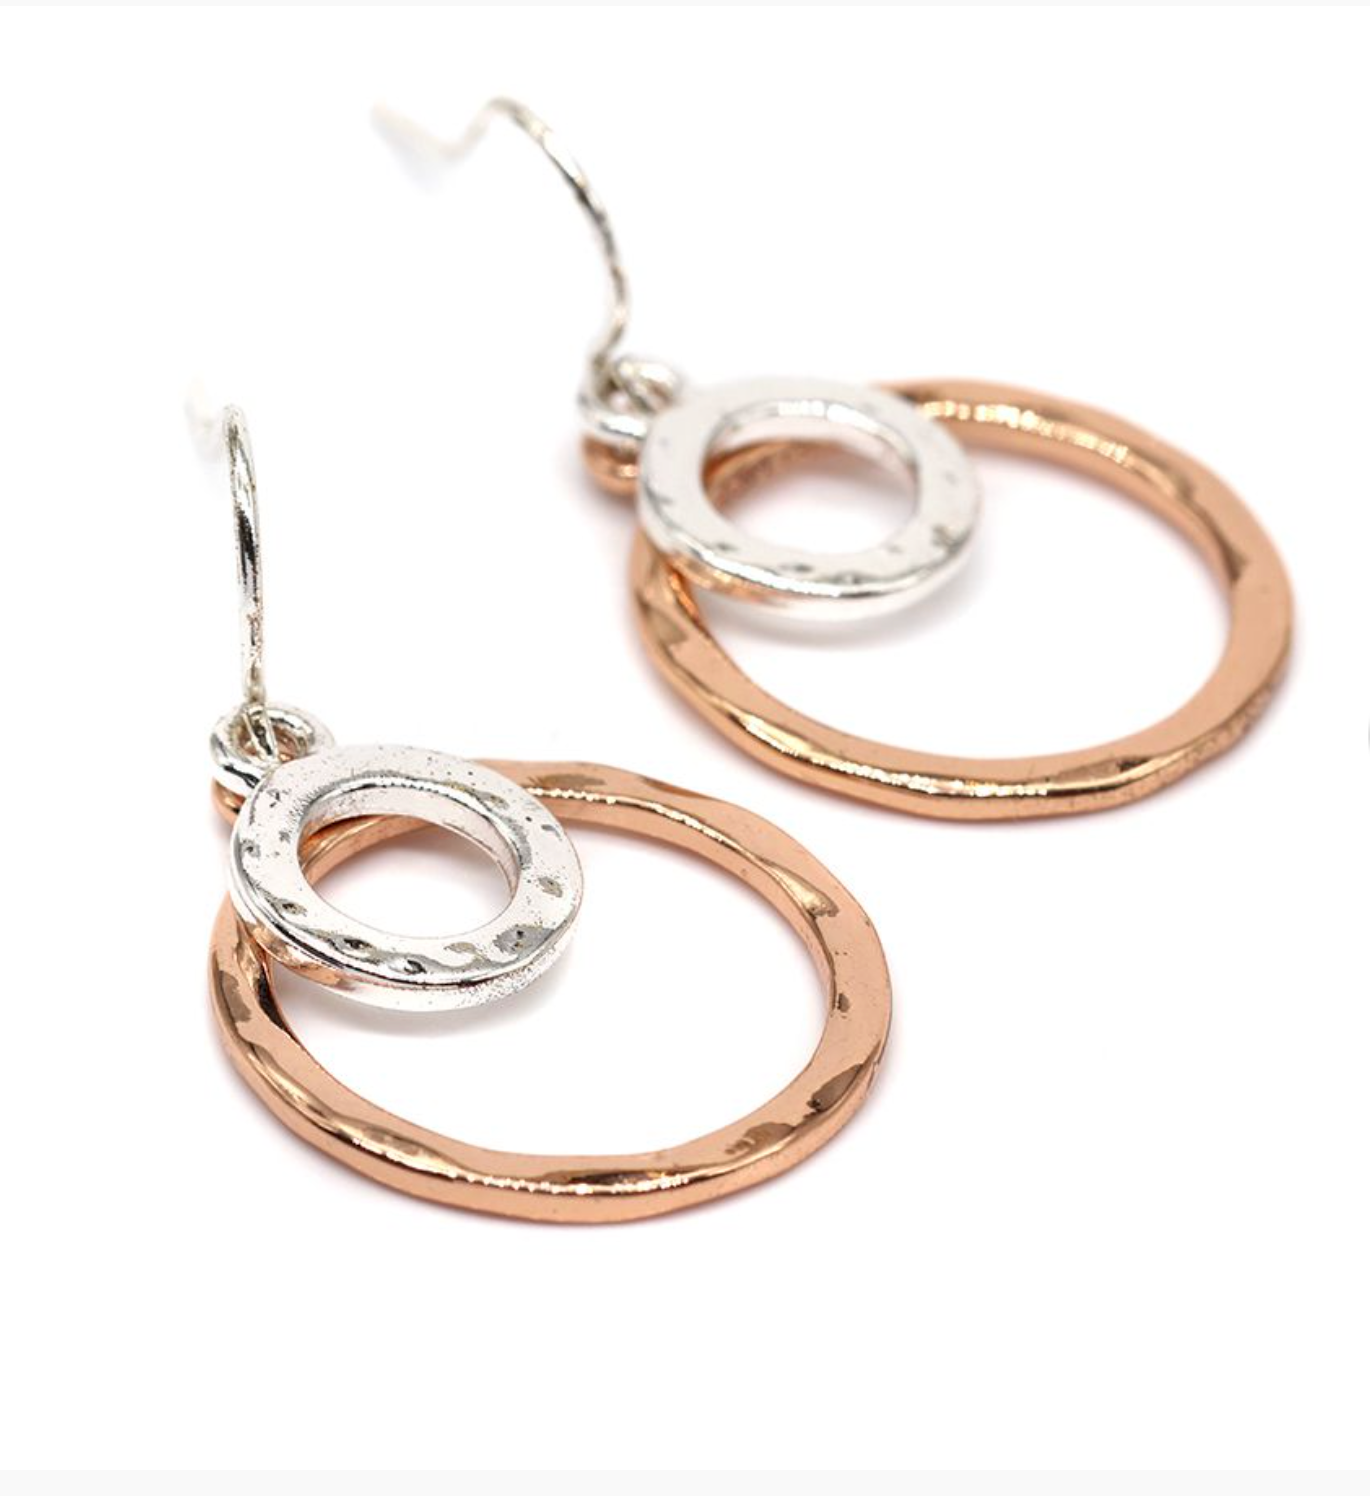 Rose Gold  and silver plated  Rings  drop earrings.